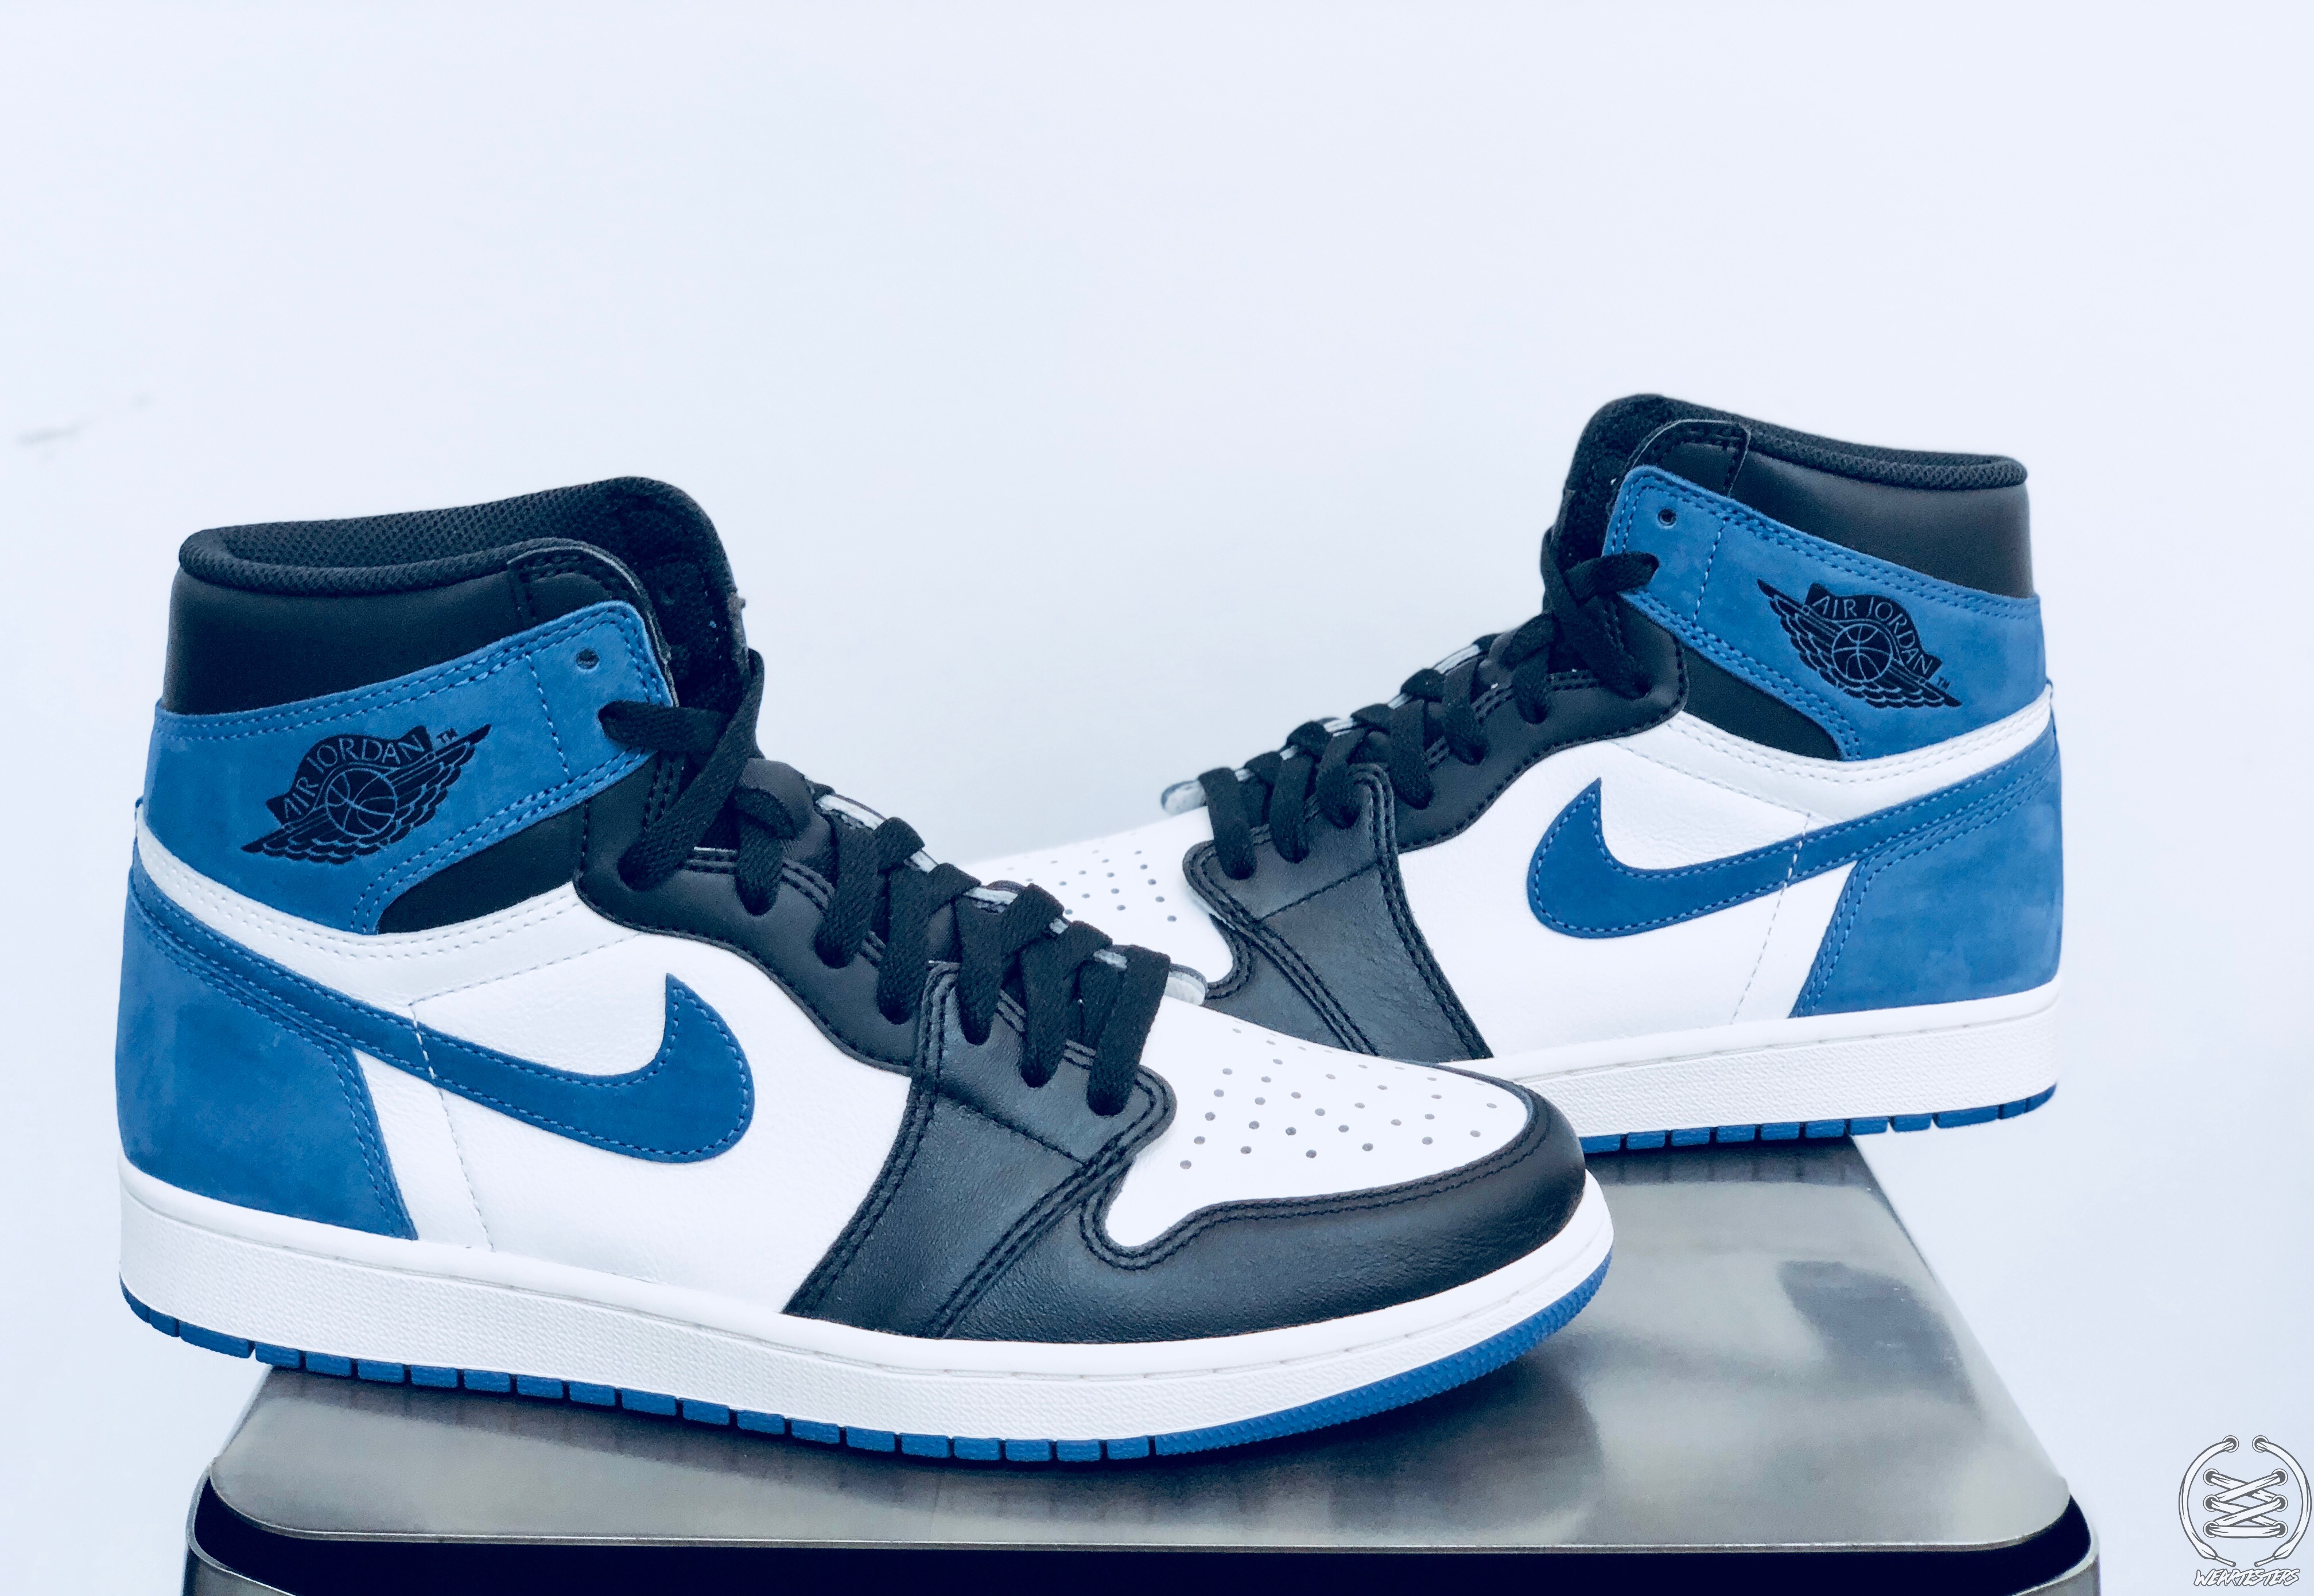 Air Jordan 1 Blue Moon Best Hand in the Game collection 5